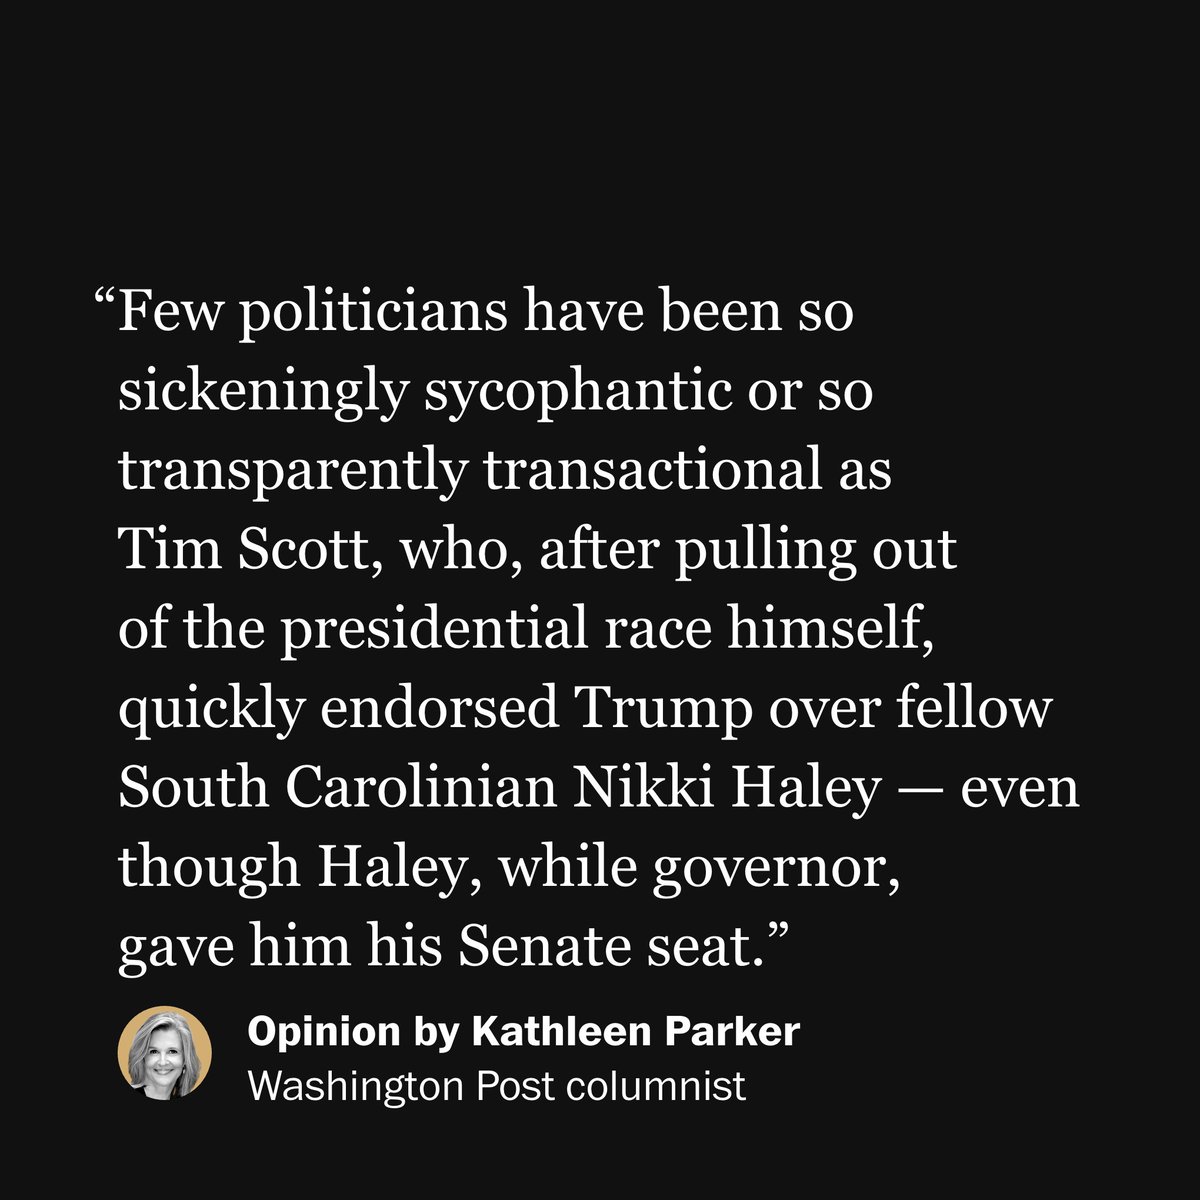 Few politicians have been so sickeningly sycophantic or so transparently transactional as Tim Scott, @KathleenParker writes. wapo.st/4afHwCA